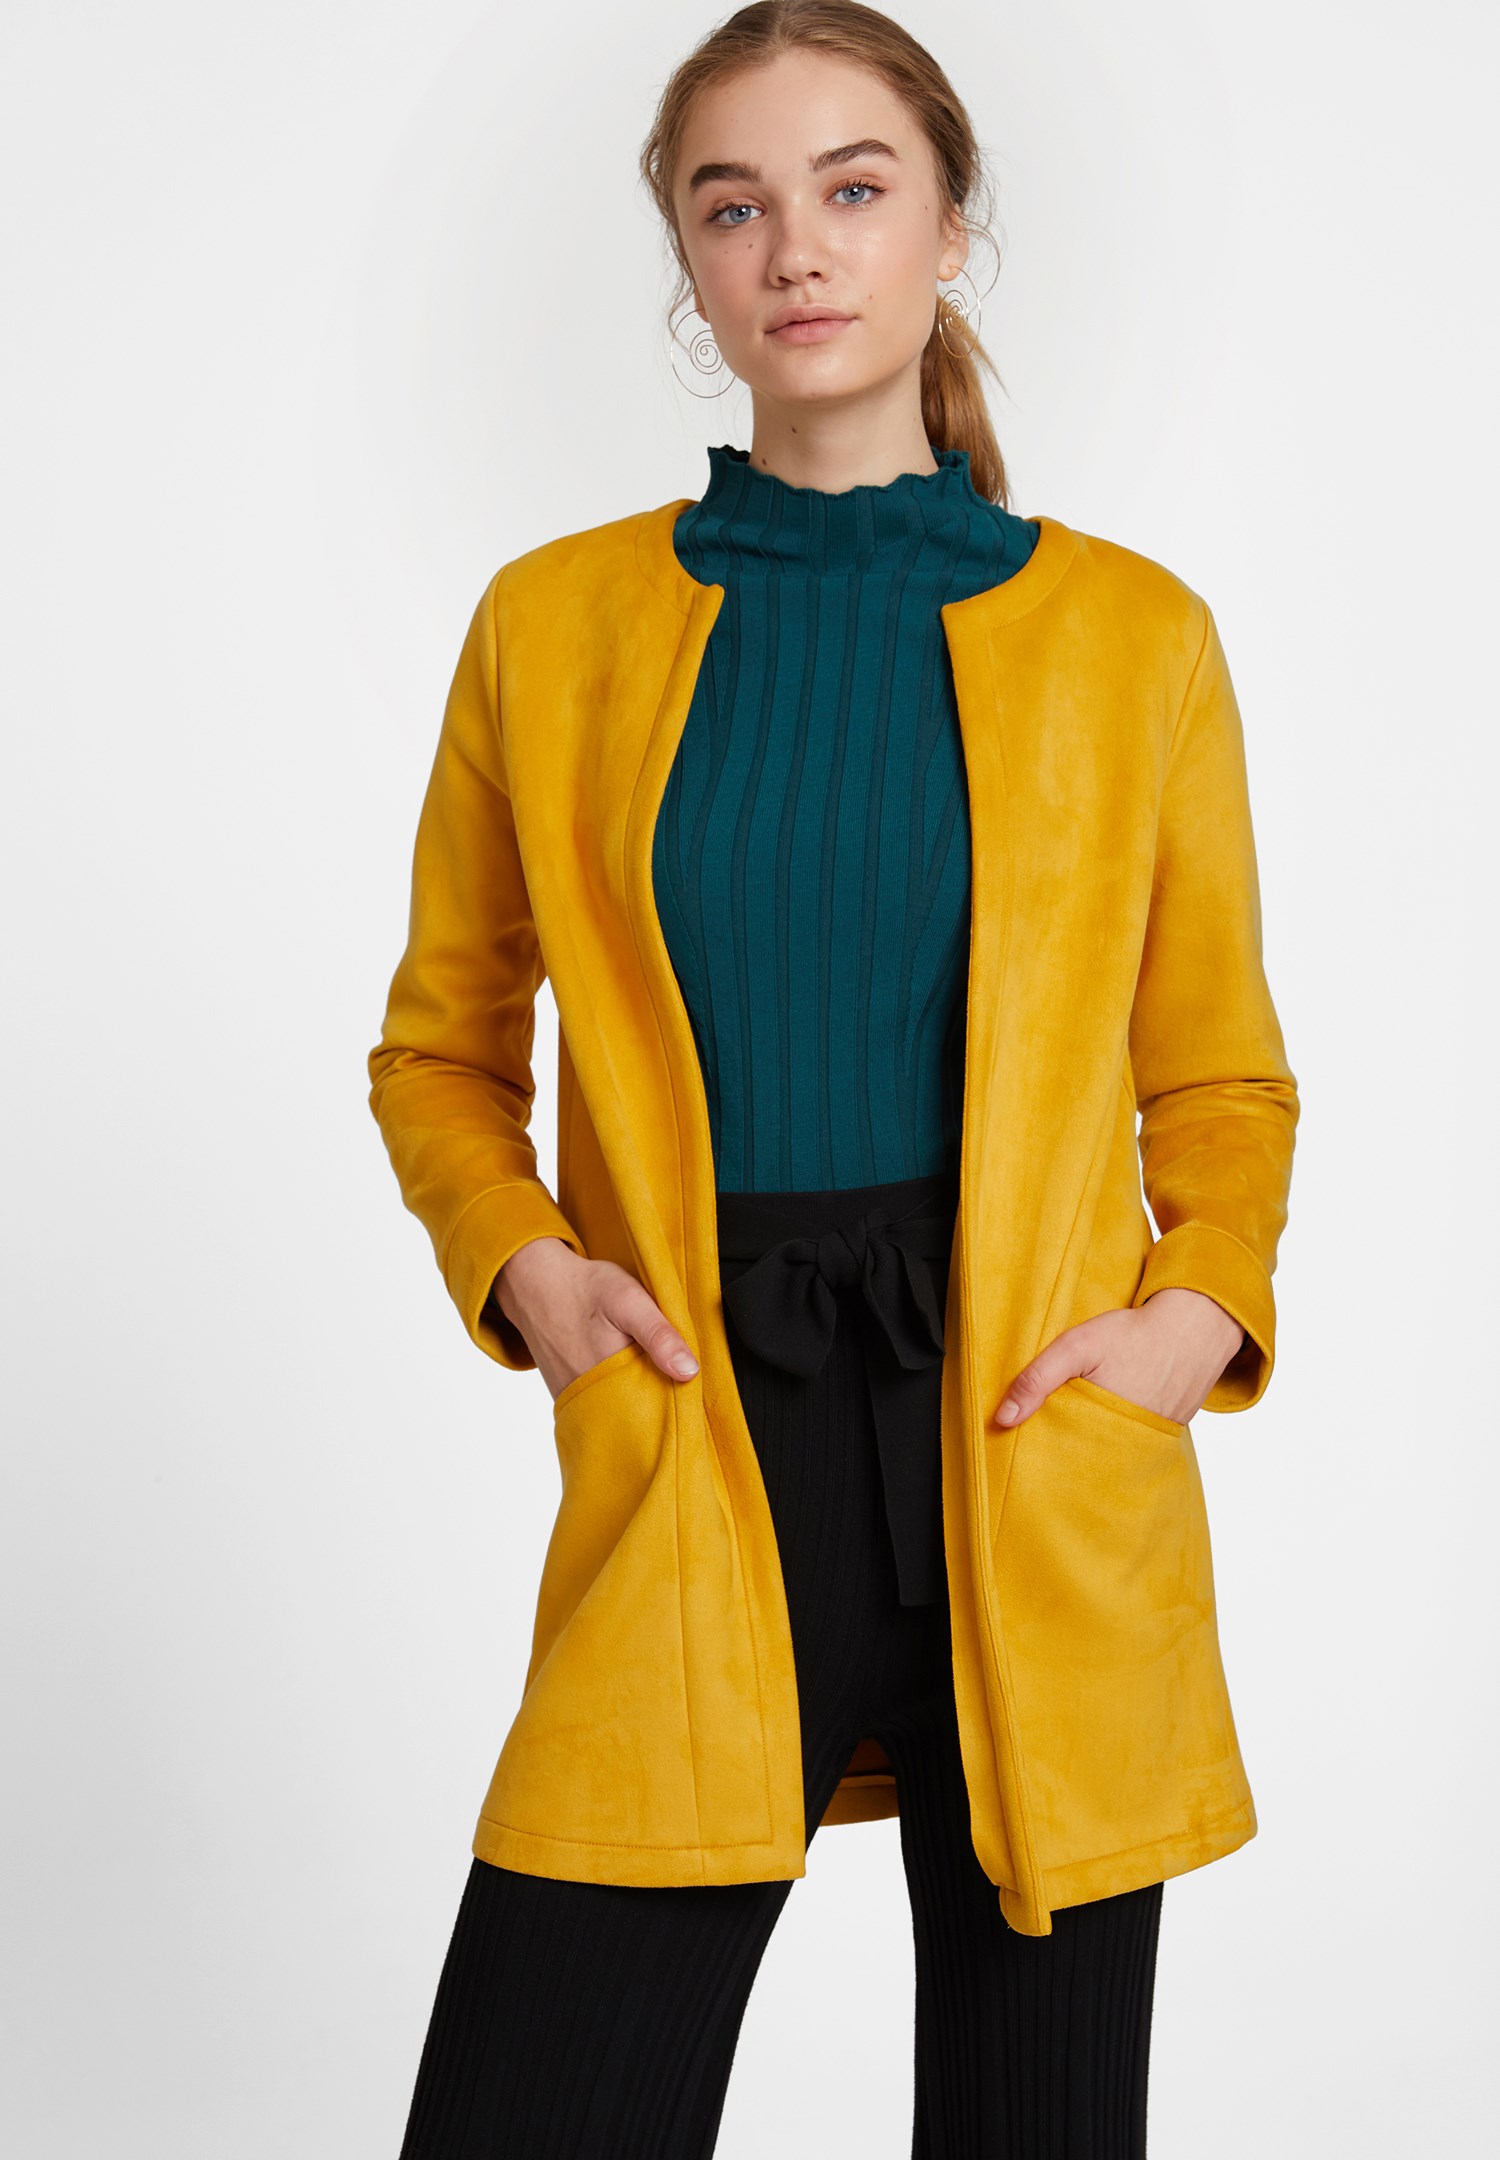 Women Yellow Suede Jacket with Pocket